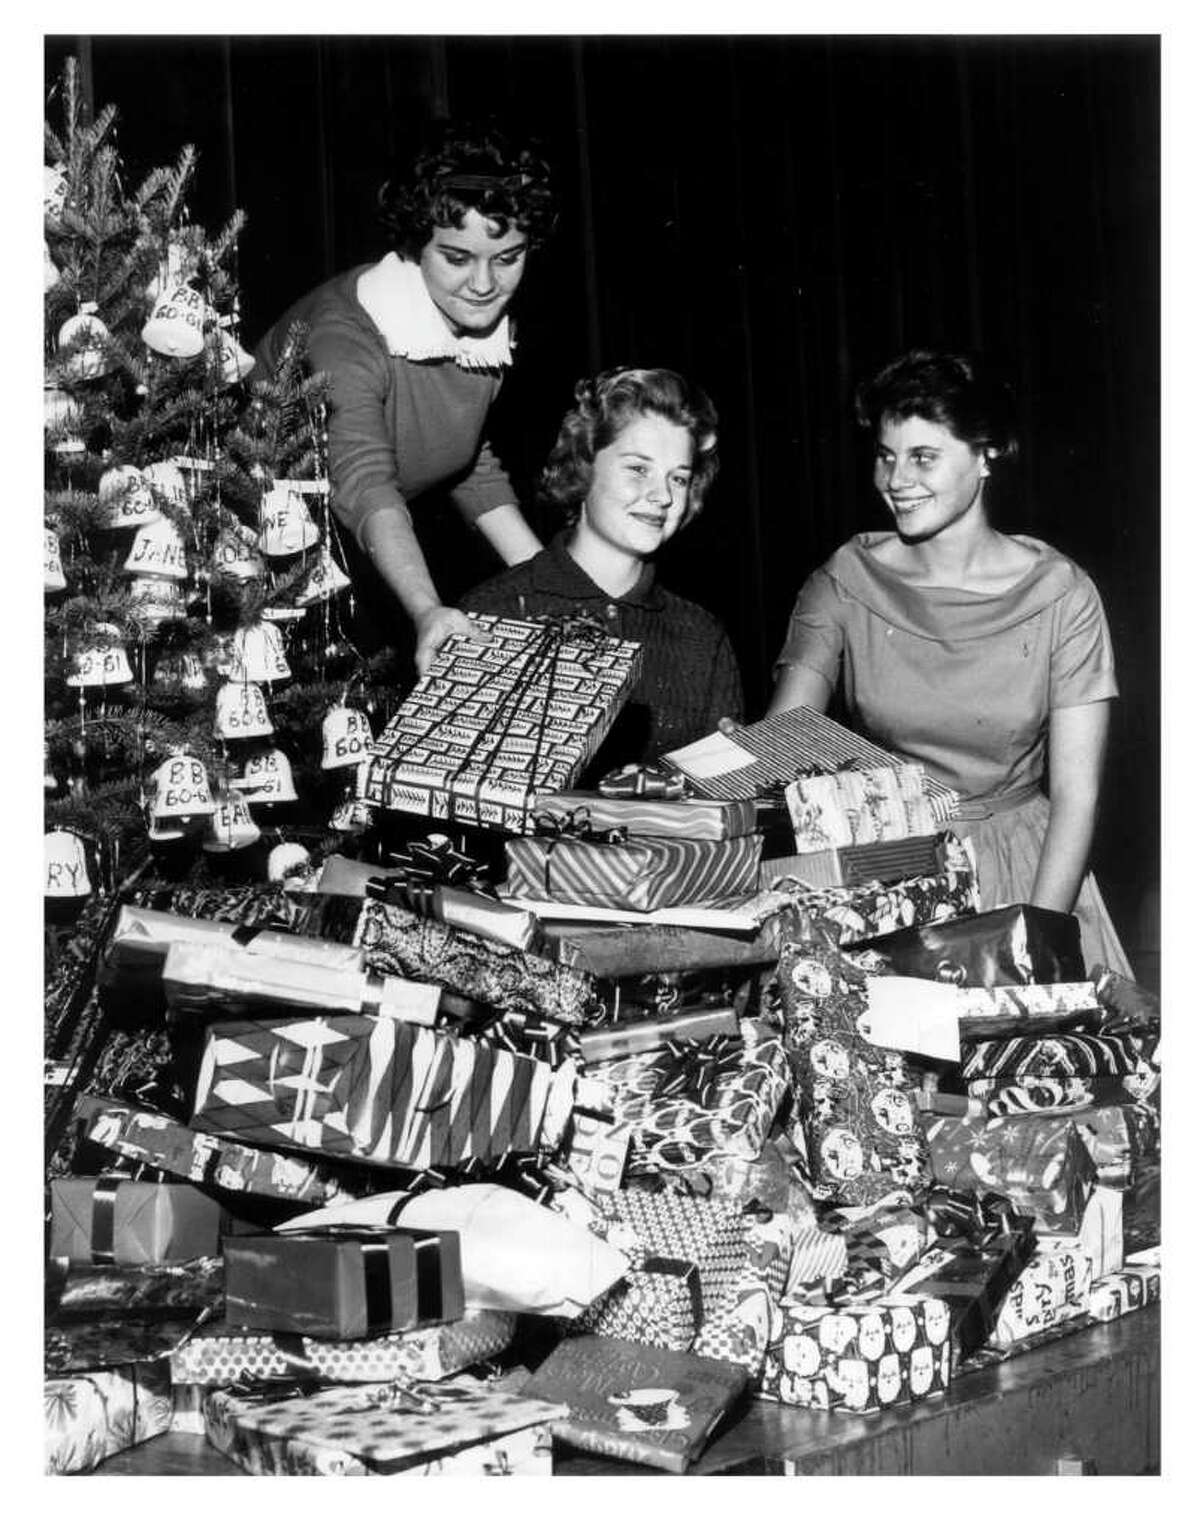 Bellaire HS drill team members help collect gifts for Goodfellows program. L-R: Martha Reitz, 17; Vicki Hoffman, 16; Irene Kaye, 16